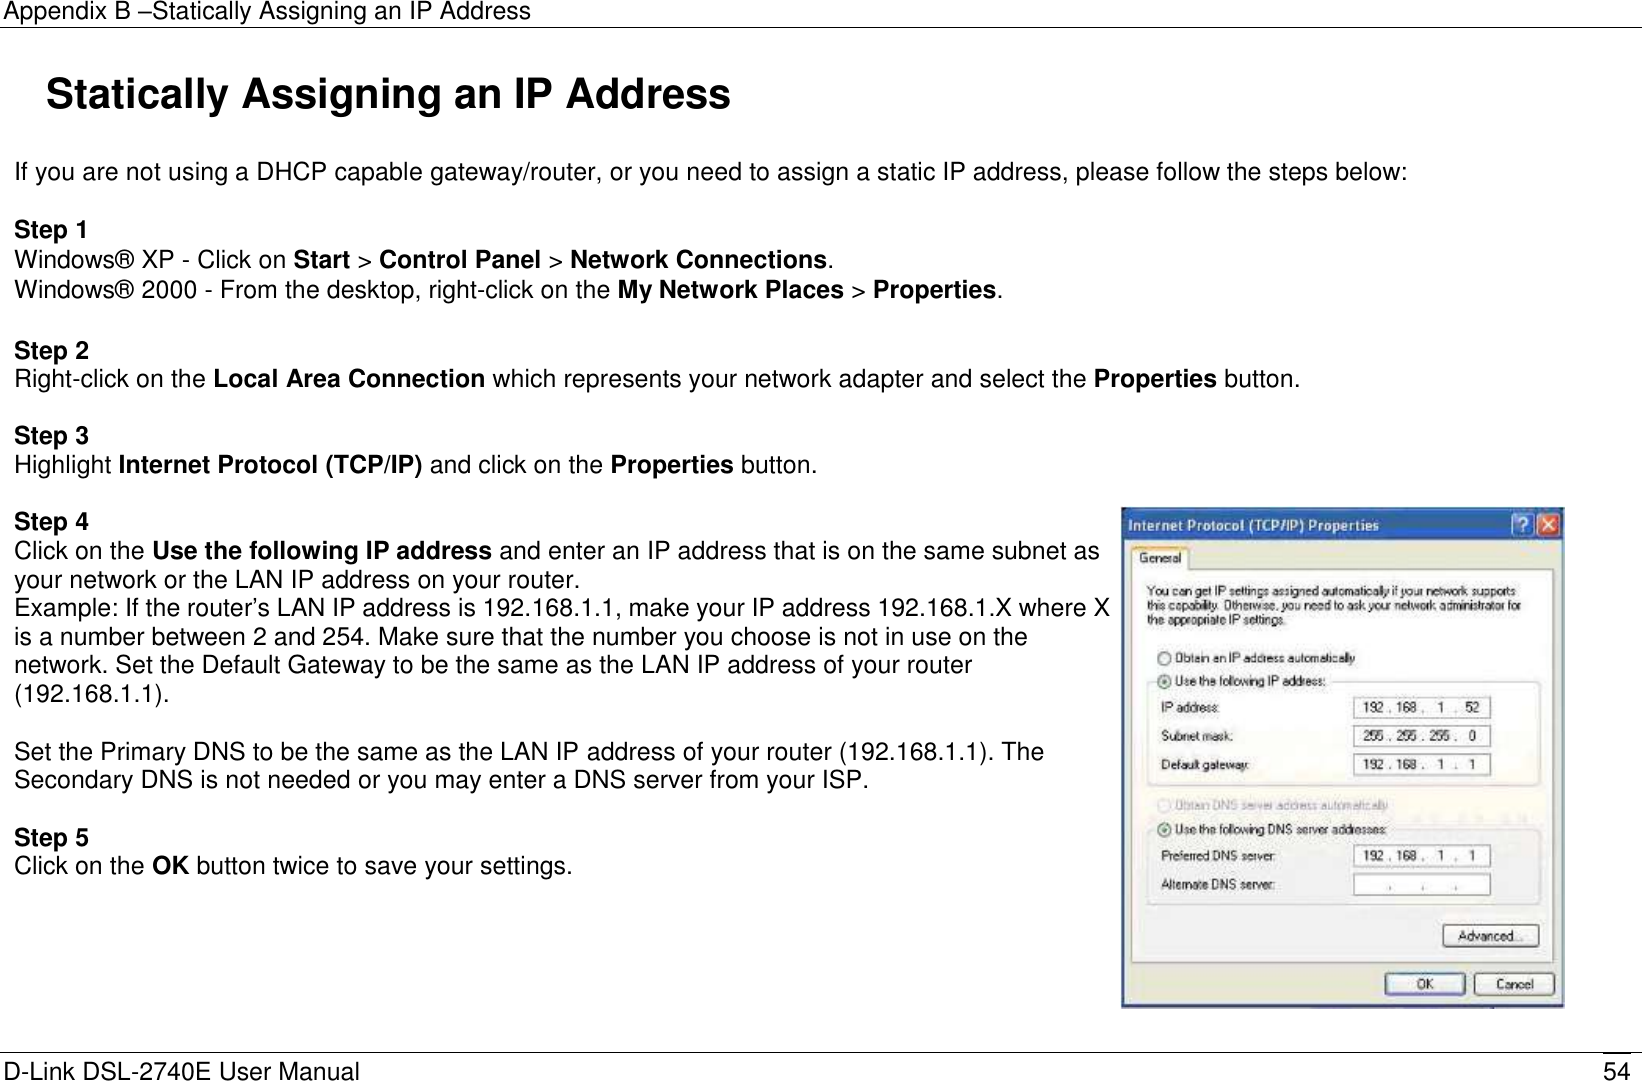 Appendix B –Statically Assigning an IP Address D-Link DSL-2740E User Manual 54   Statically Assigning an IP Address  If you are not using a DHCP capable gateway/router, or you need to assign a static IP address, please follow the steps below:  Step 1 Windows®  XP - Click on Start &gt; Control Panel &gt; Network Connections. Windows®  2000 - From the desktop, right-click on the My Network Places &gt; Properties.   Step 2 Right-click on the Local Area Connection which represents your network adapter and select the Properties button.  Step 3 Highlight Internet Protocol (TCP/IP) and click on the Properties button.  Step 4 Click on the Use the following IP address and enter an IP address that is on the same subnet as your network or the LAN IP address on your router. Example: If the router’s LAN IP address is 192.168.1.1, make your IP address 192.168.1.X where X is a number between 2 and 254. Make sure that the number you choose is not in use on the network. Set the Default Gateway to be the same as the LAN IP address of your router (192.168.1.1).  Set the Primary DNS to be the same as the LAN IP address of your router (192.168.1.1). The Secondary DNS is not needed or you may enter a DNS server from your ISP.  Step 5 Click on the OK button twice to save your settings.        